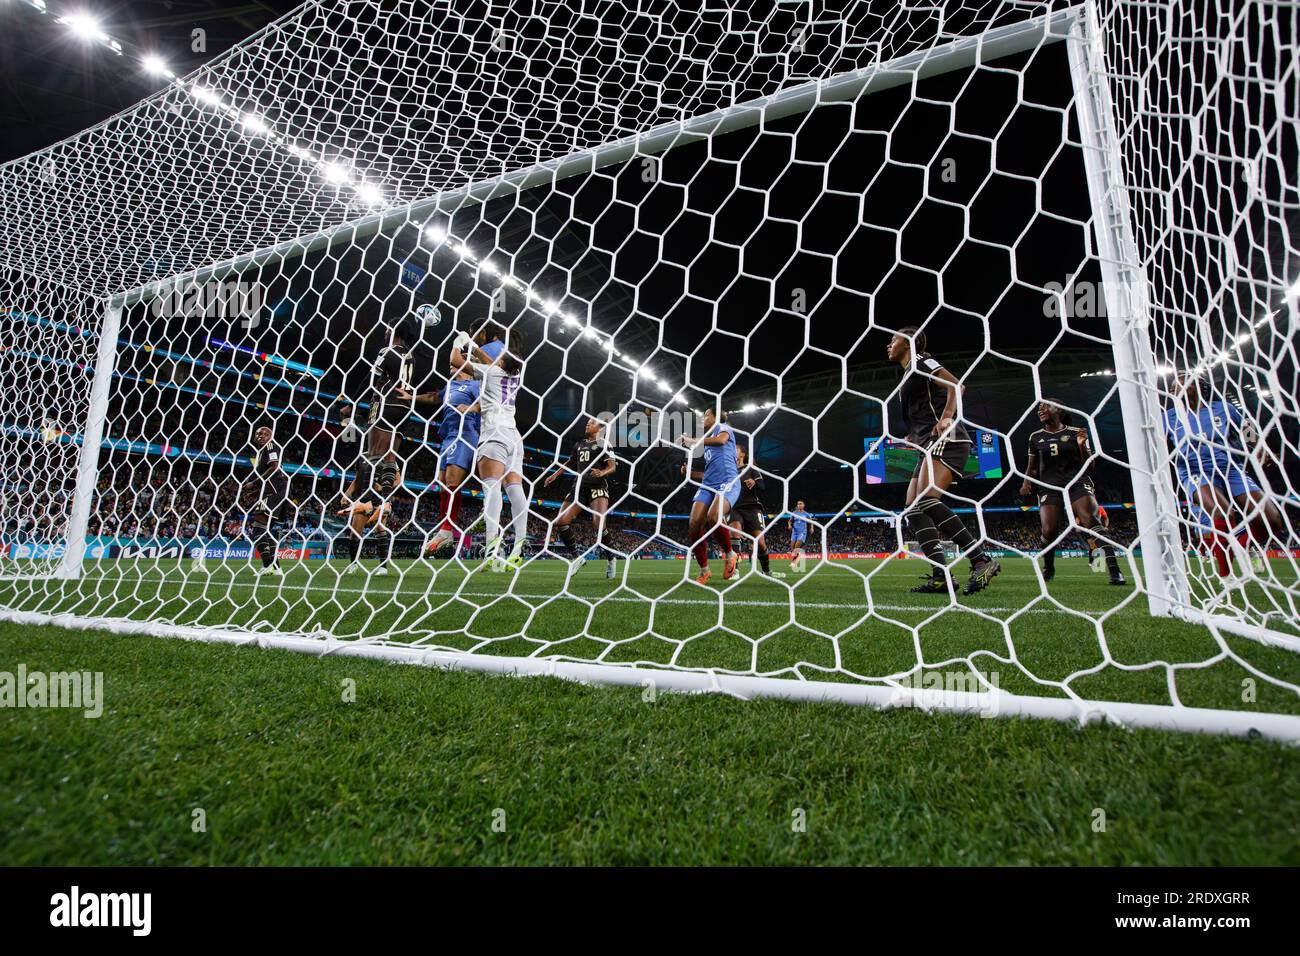 Sydney, Australia. 23rd July, 2023. Goal keeper, Rebecca Spencer of Jamaica punches the ball during the FIFA Women's World Cup 2023 between France and Jamaica at Sydney Football Stadium on July 23, 2023 in Sydney, Australia Credit: IOIO IMAGES/Alamy Live News Stock Photo